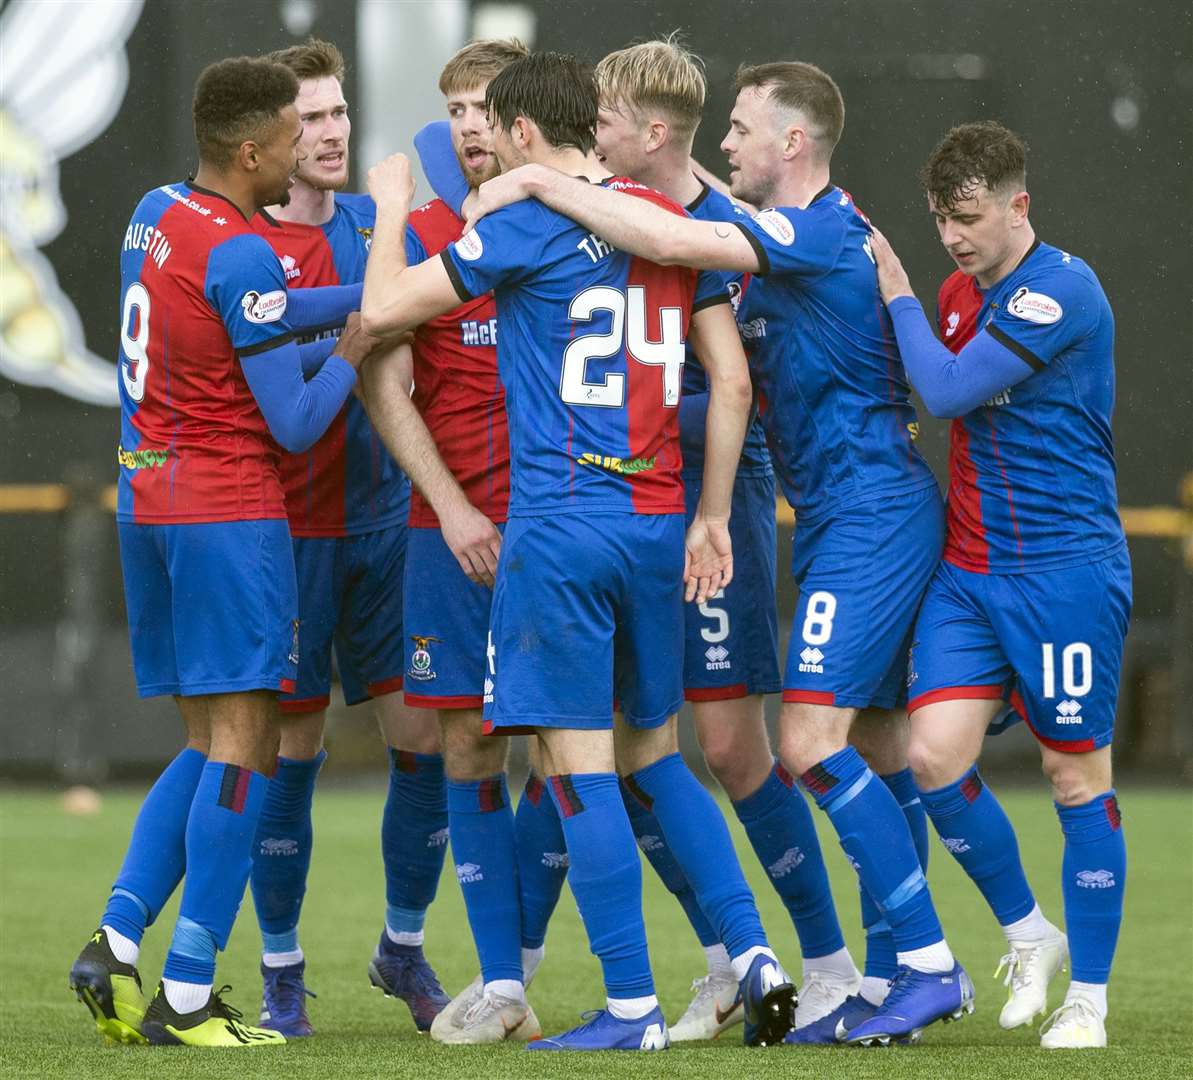 Inverness Caledonian Thistle will start pre-season against Highland League opposition.